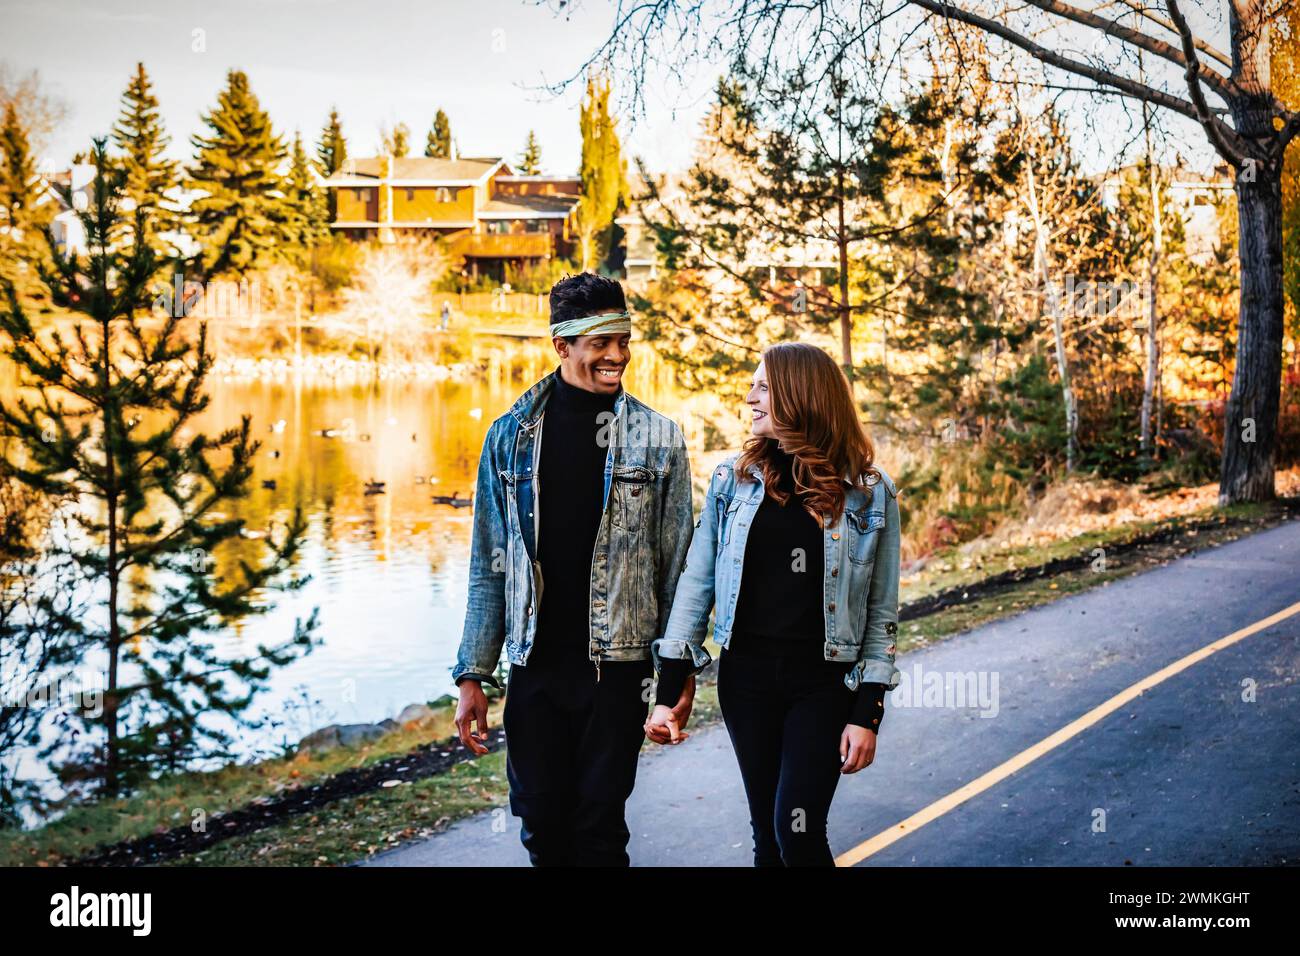 A mixed race married couple holding hands and smiling at each other, walking down a road in a city park during a fall family outing, spending quali... Stock Photo